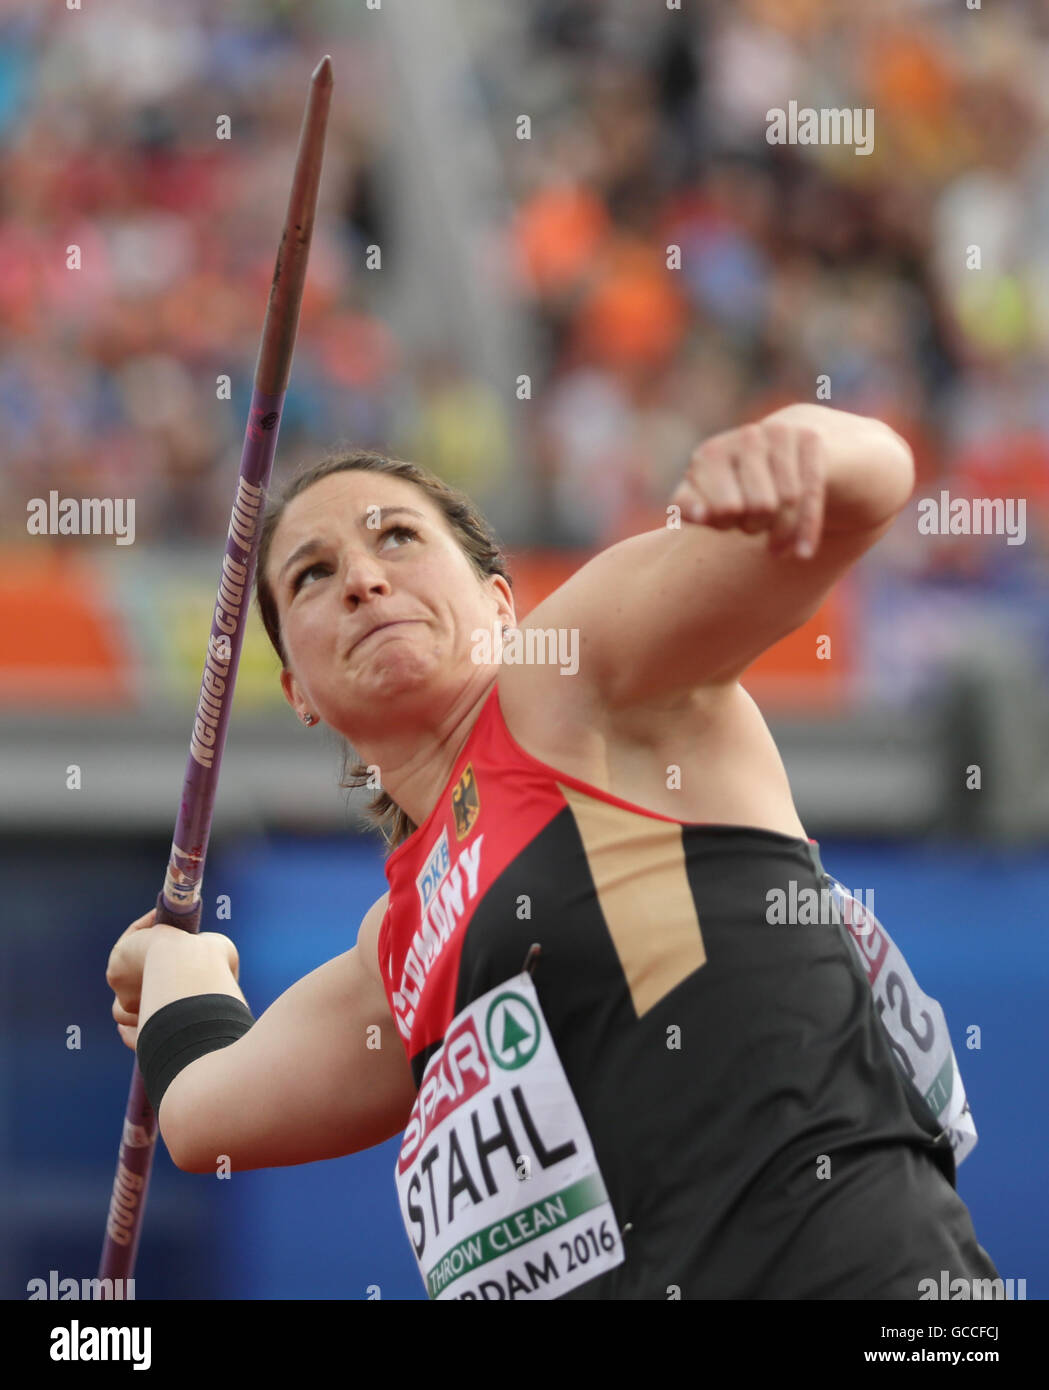 Amsterdam, The Netherlands. 9th July, 2016. Germany's Linda Stahl competes in the women's Javelin Throw final at the European Athletics Championships at the Olympic Stadium in Amsterdam, The Netherlands, 09 July 2016. Photo: Michael Kappeler/dpa/Alamy Live News Stock Photo